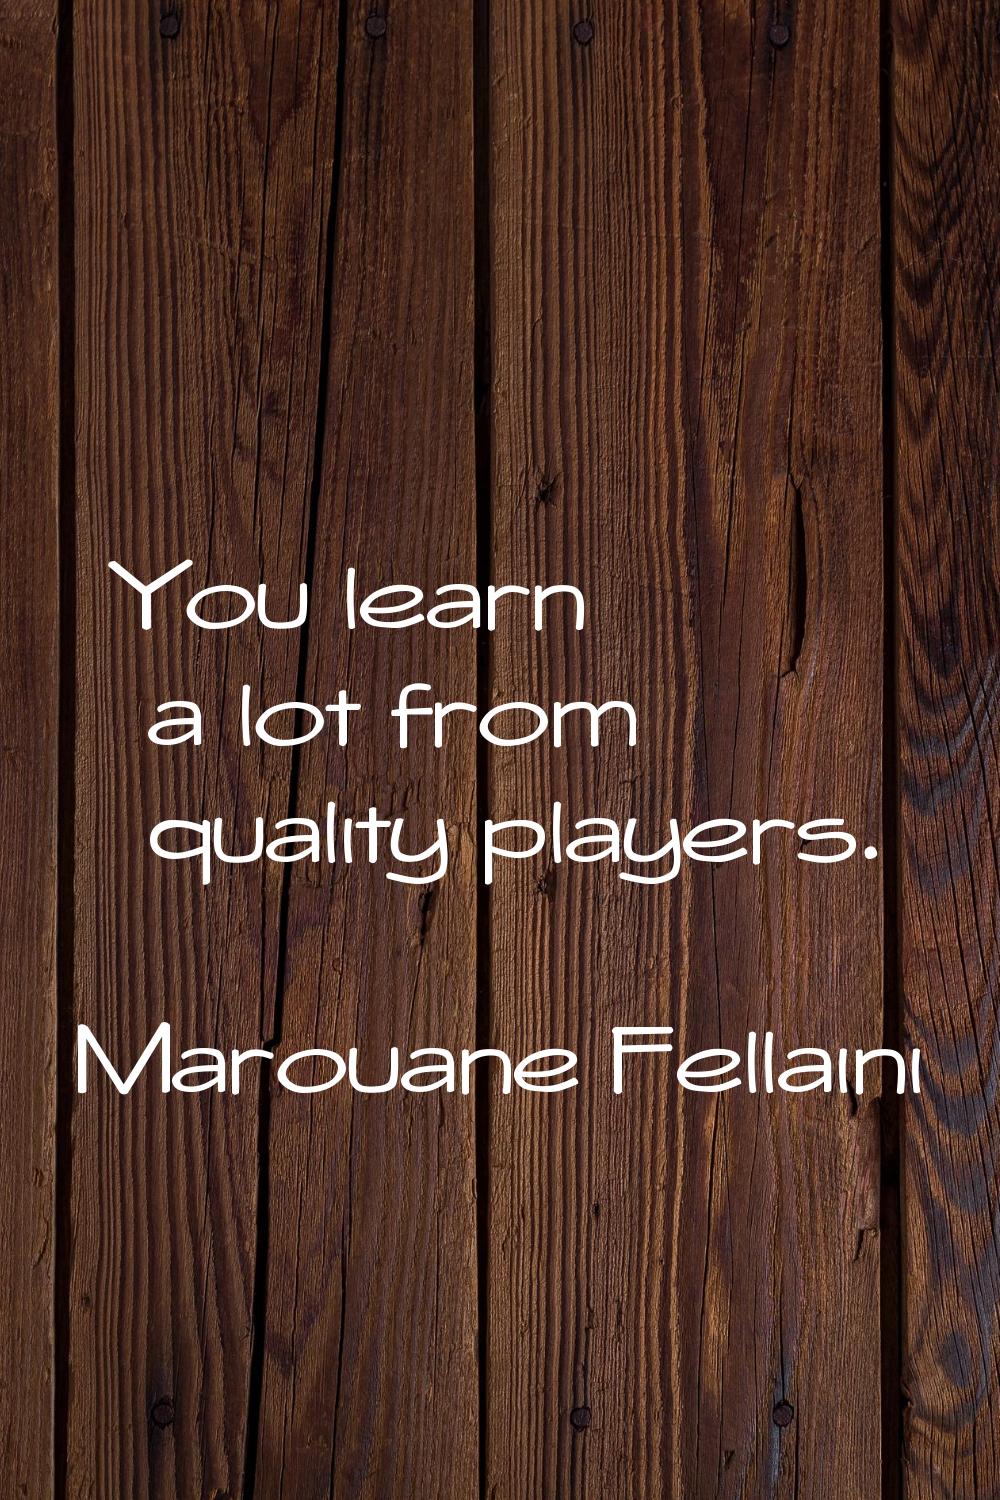 You learn a lot from quality players.